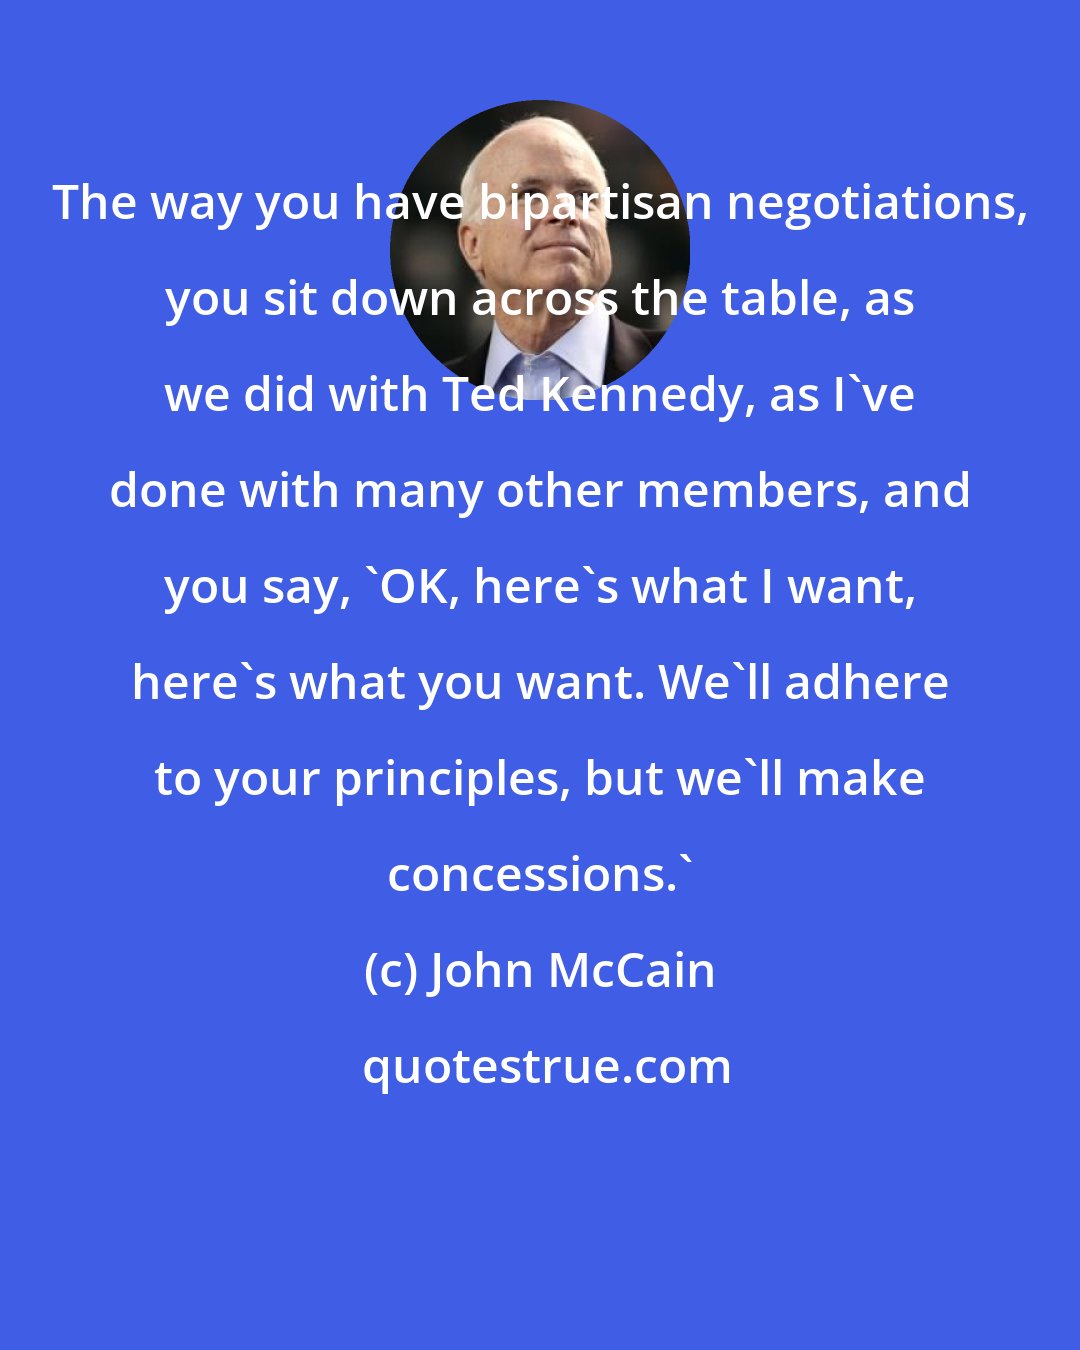 John McCain: The way you have bipartisan negotiations, you sit down across the table, as we did with Ted Kennedy, as I've done with many other members, and you say, 'OK, here's what I want, here's what you want. We'll adhere to your principles, but we'll make concessions.'